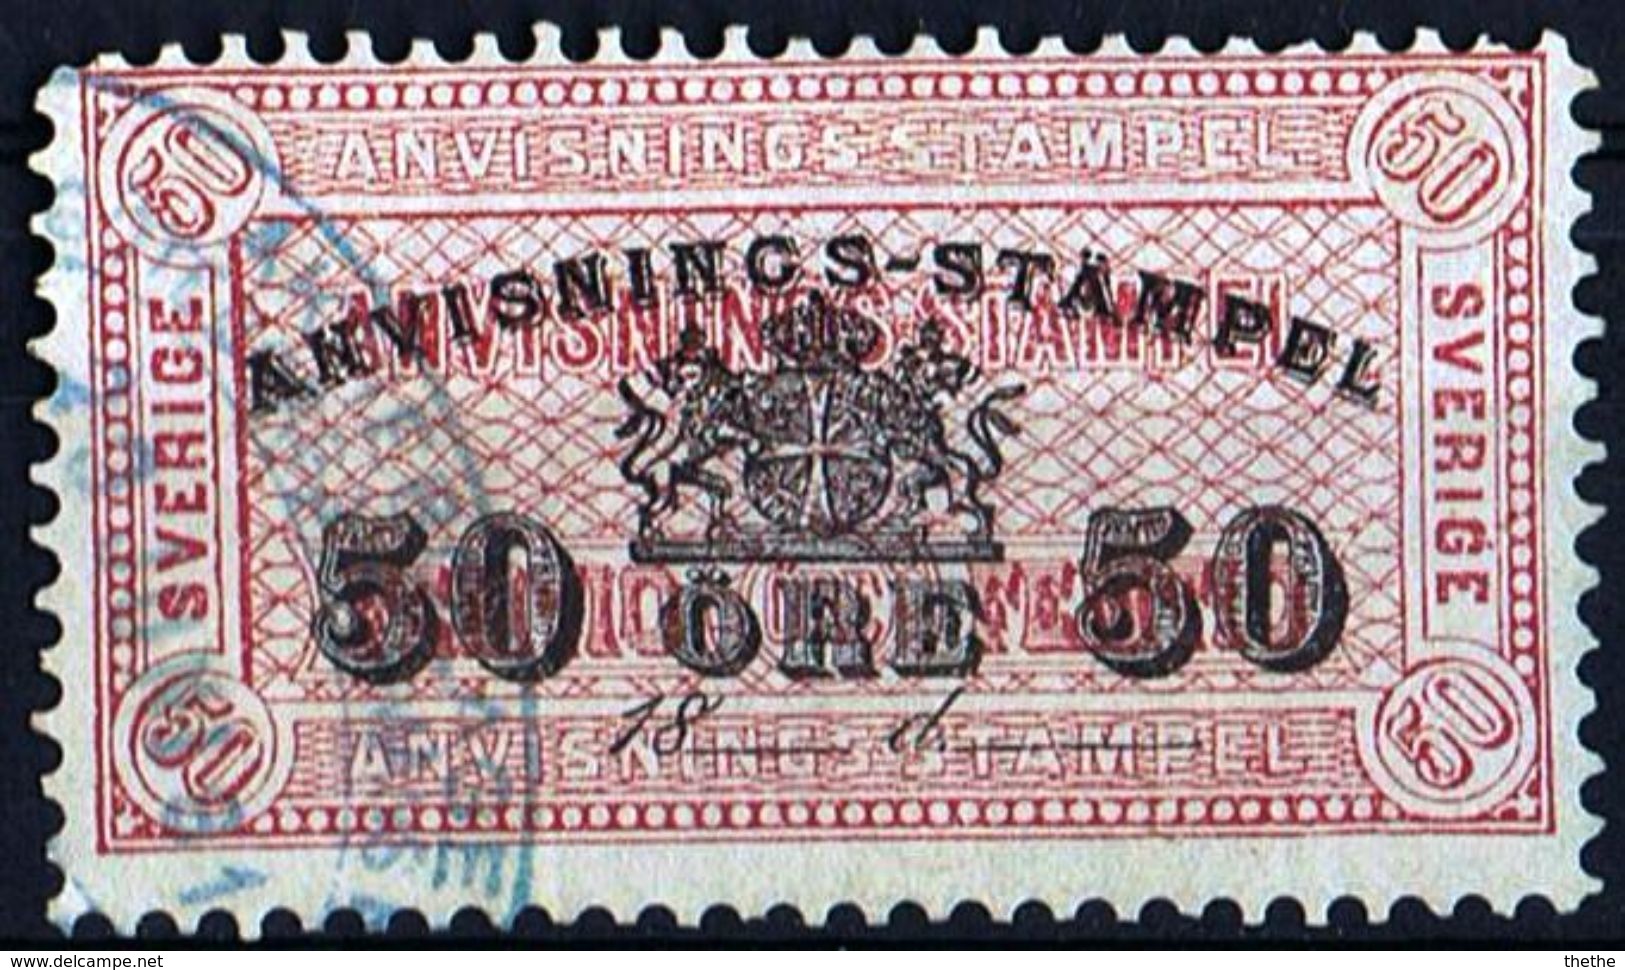 SUEDE - Timbre Fiscal De 50 Ore De 1880 Anvisnings-Stamp - Fiscales